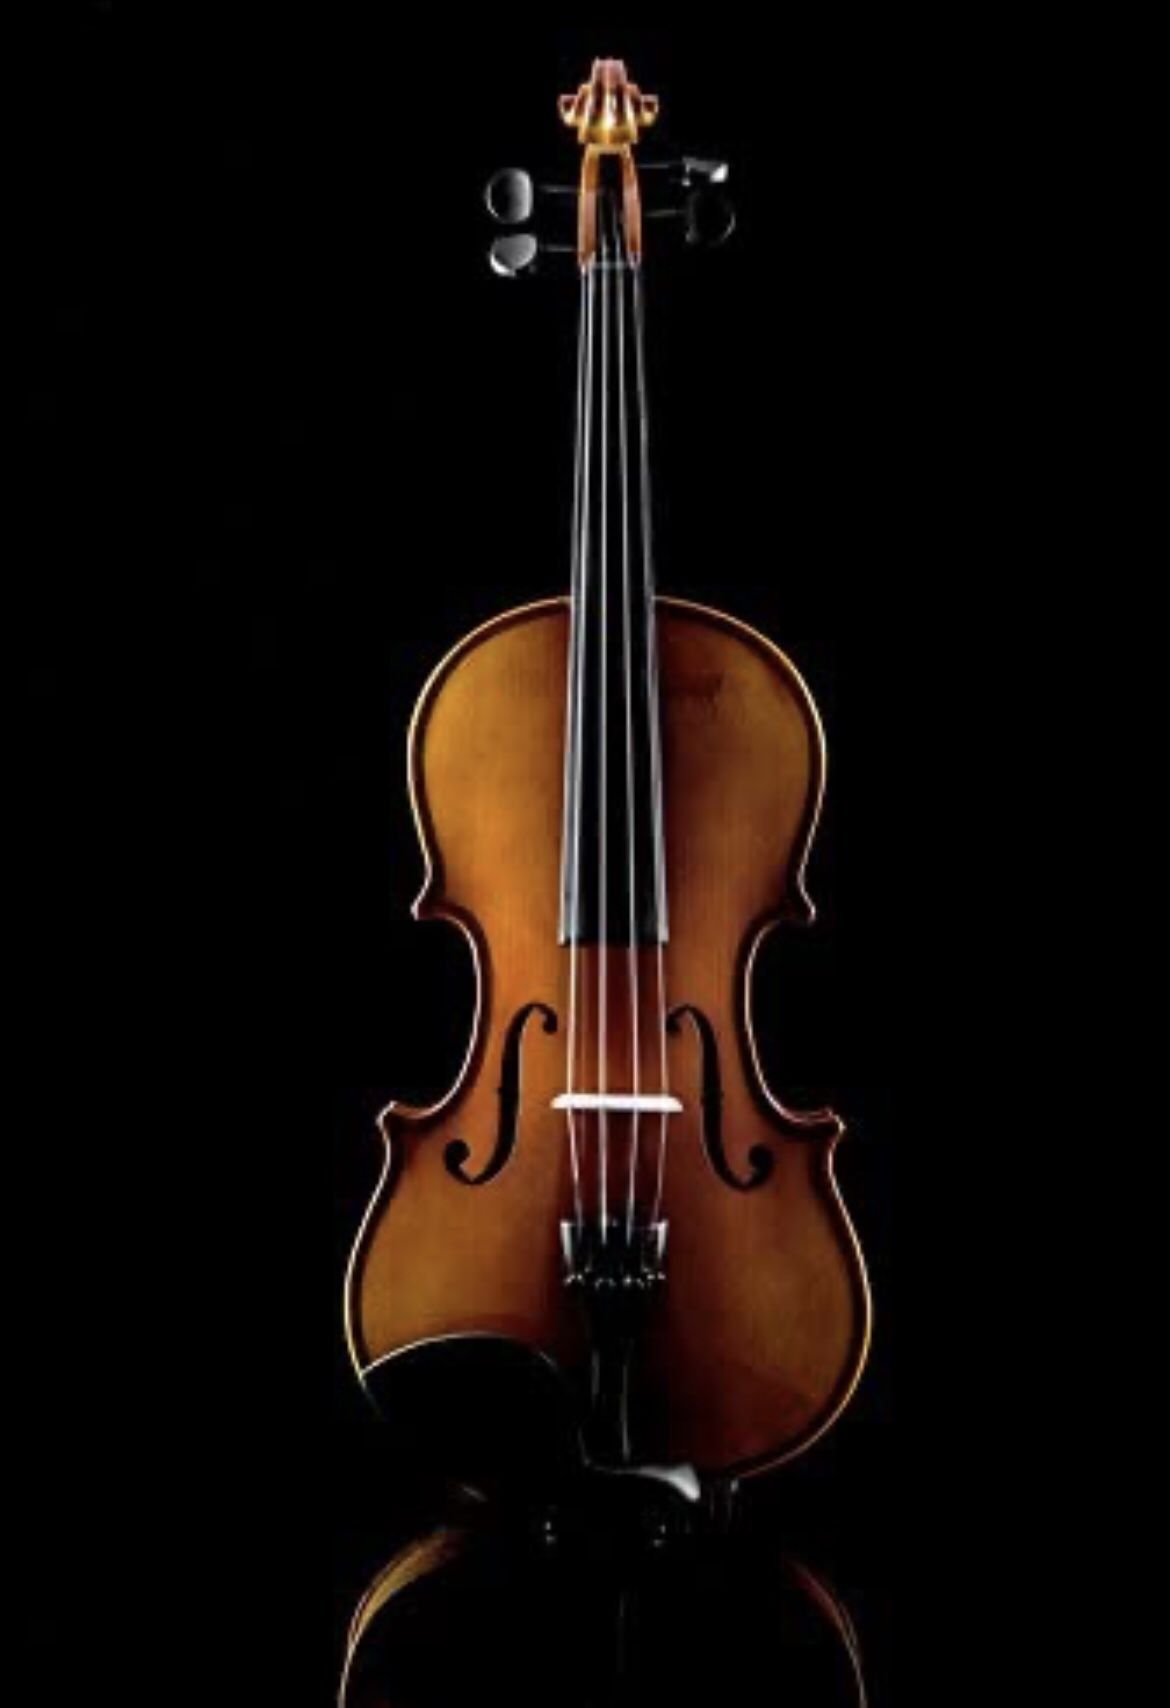 1/2 Solid Wood Violin with Case, Shoulder Rest, Bow, Rosin and Extra Strings -Black Accessory Fitted